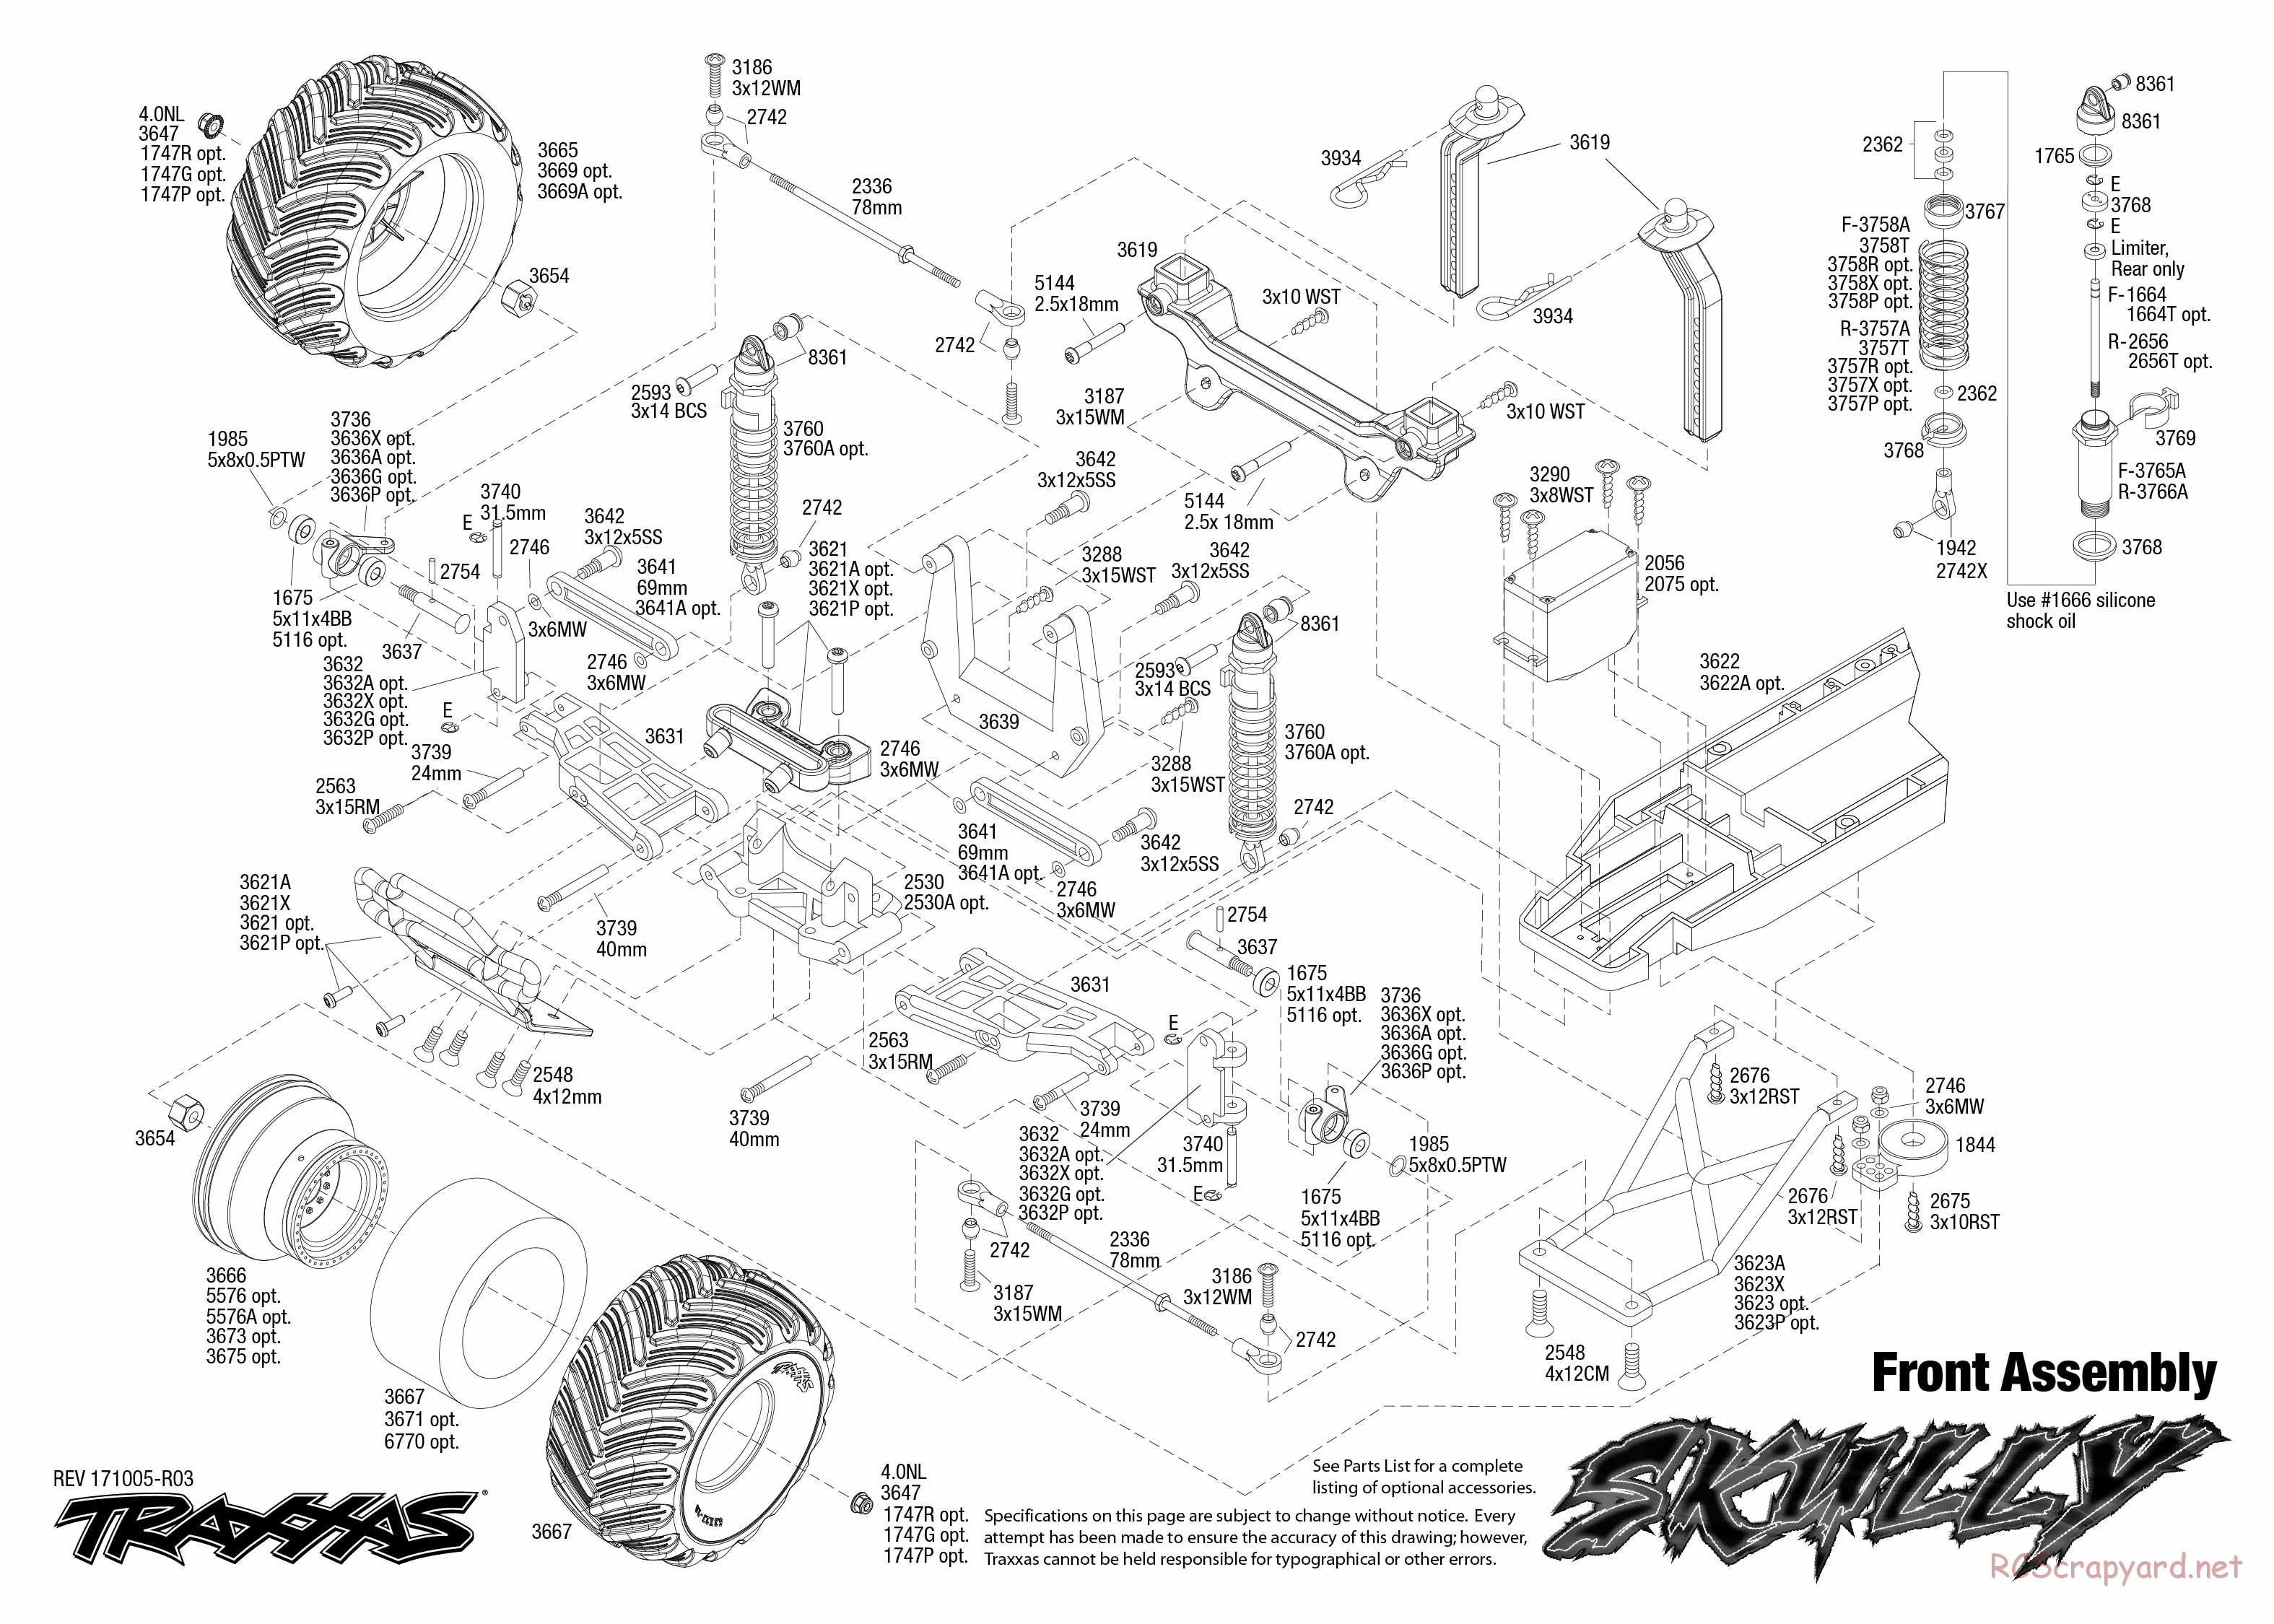 Traxxas - Skully - Exploded Views - Page 2